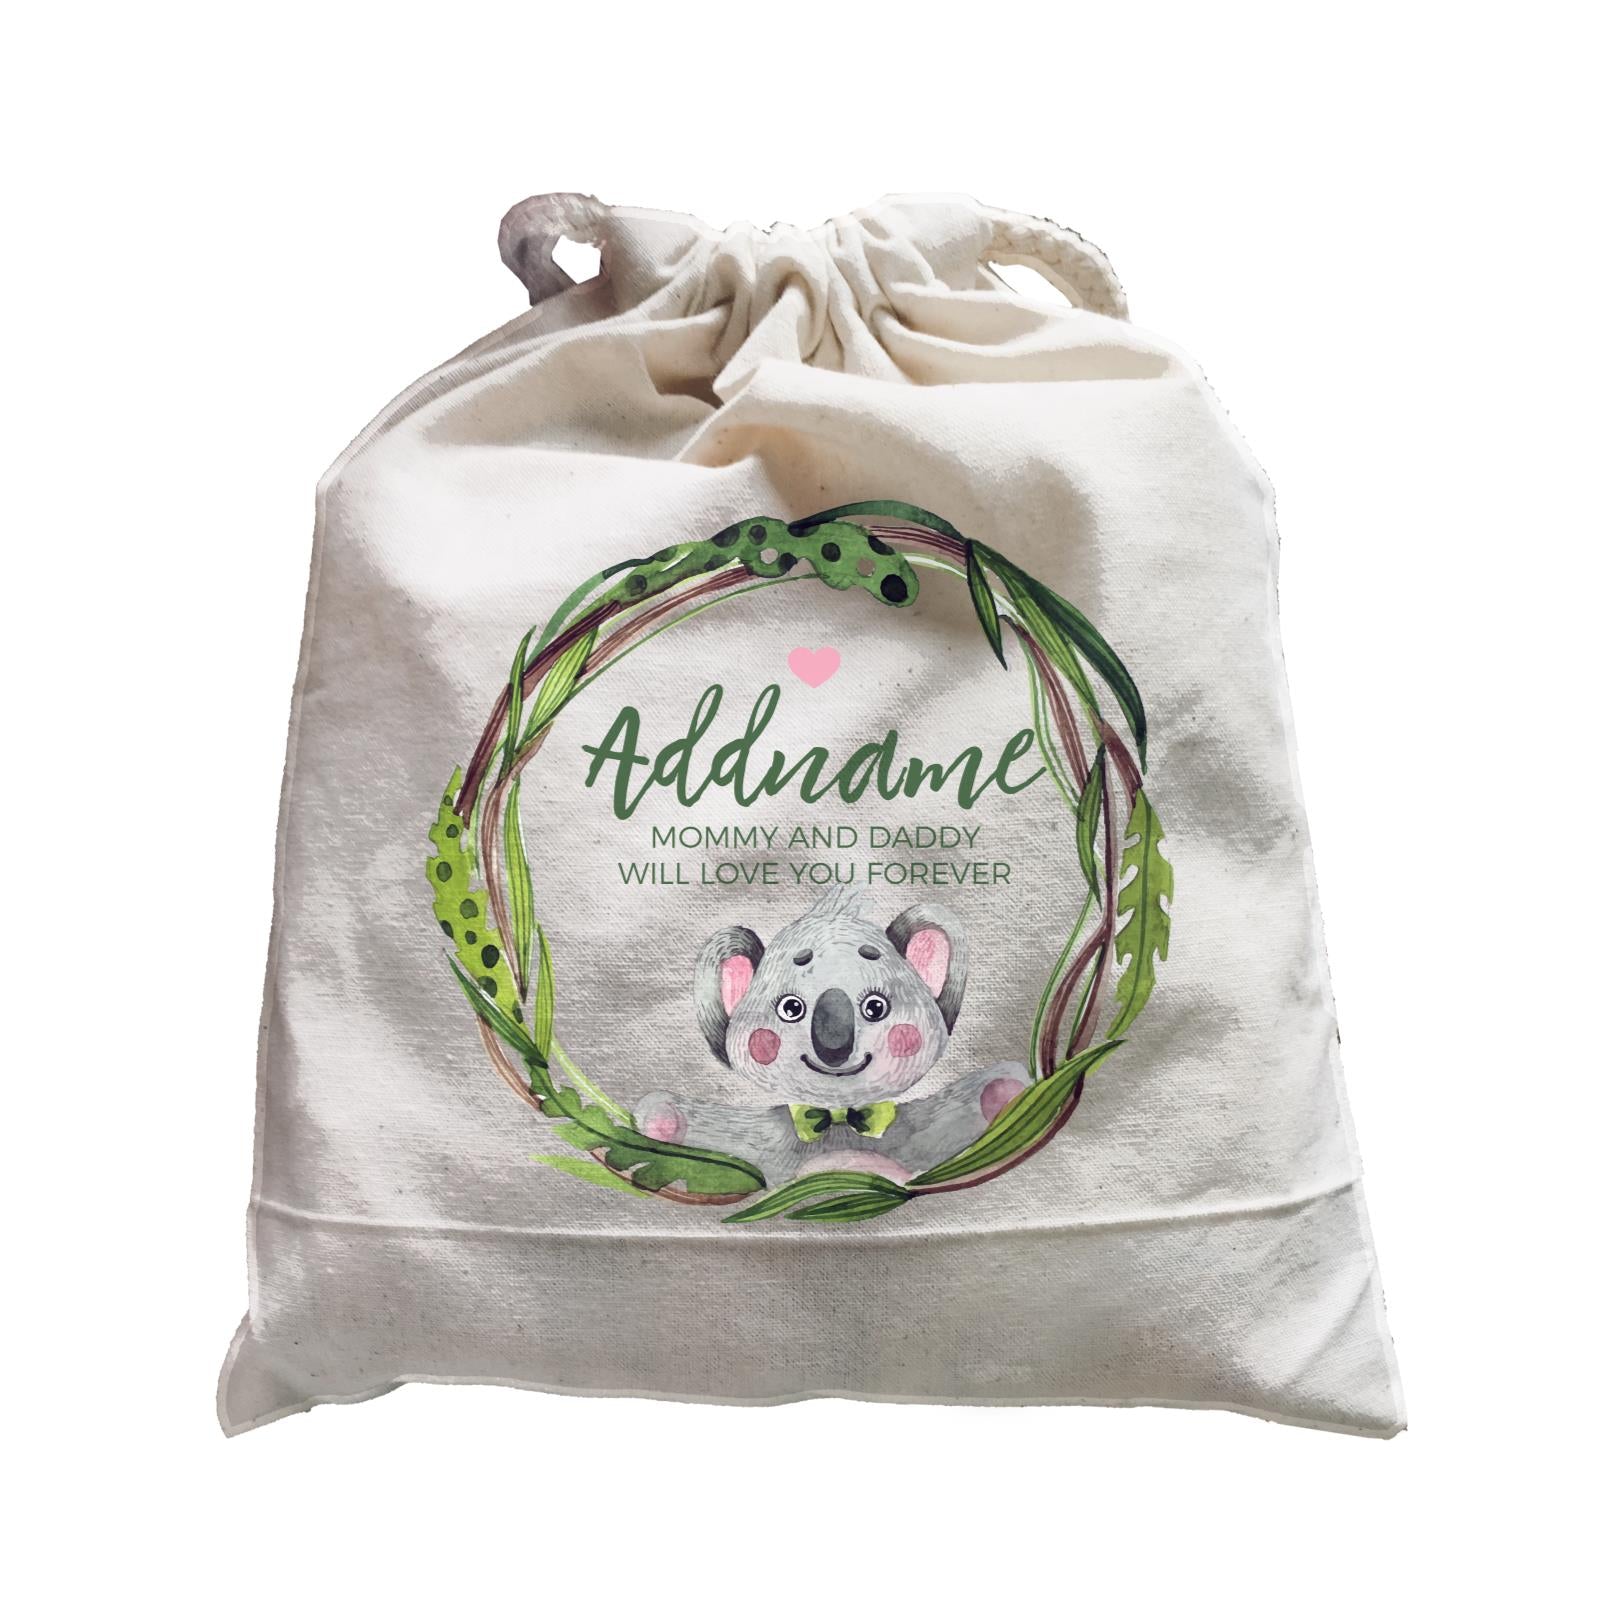 Watercolour Pink Koala Green Leaves Wreath Personalizable with Name and Text Satchel